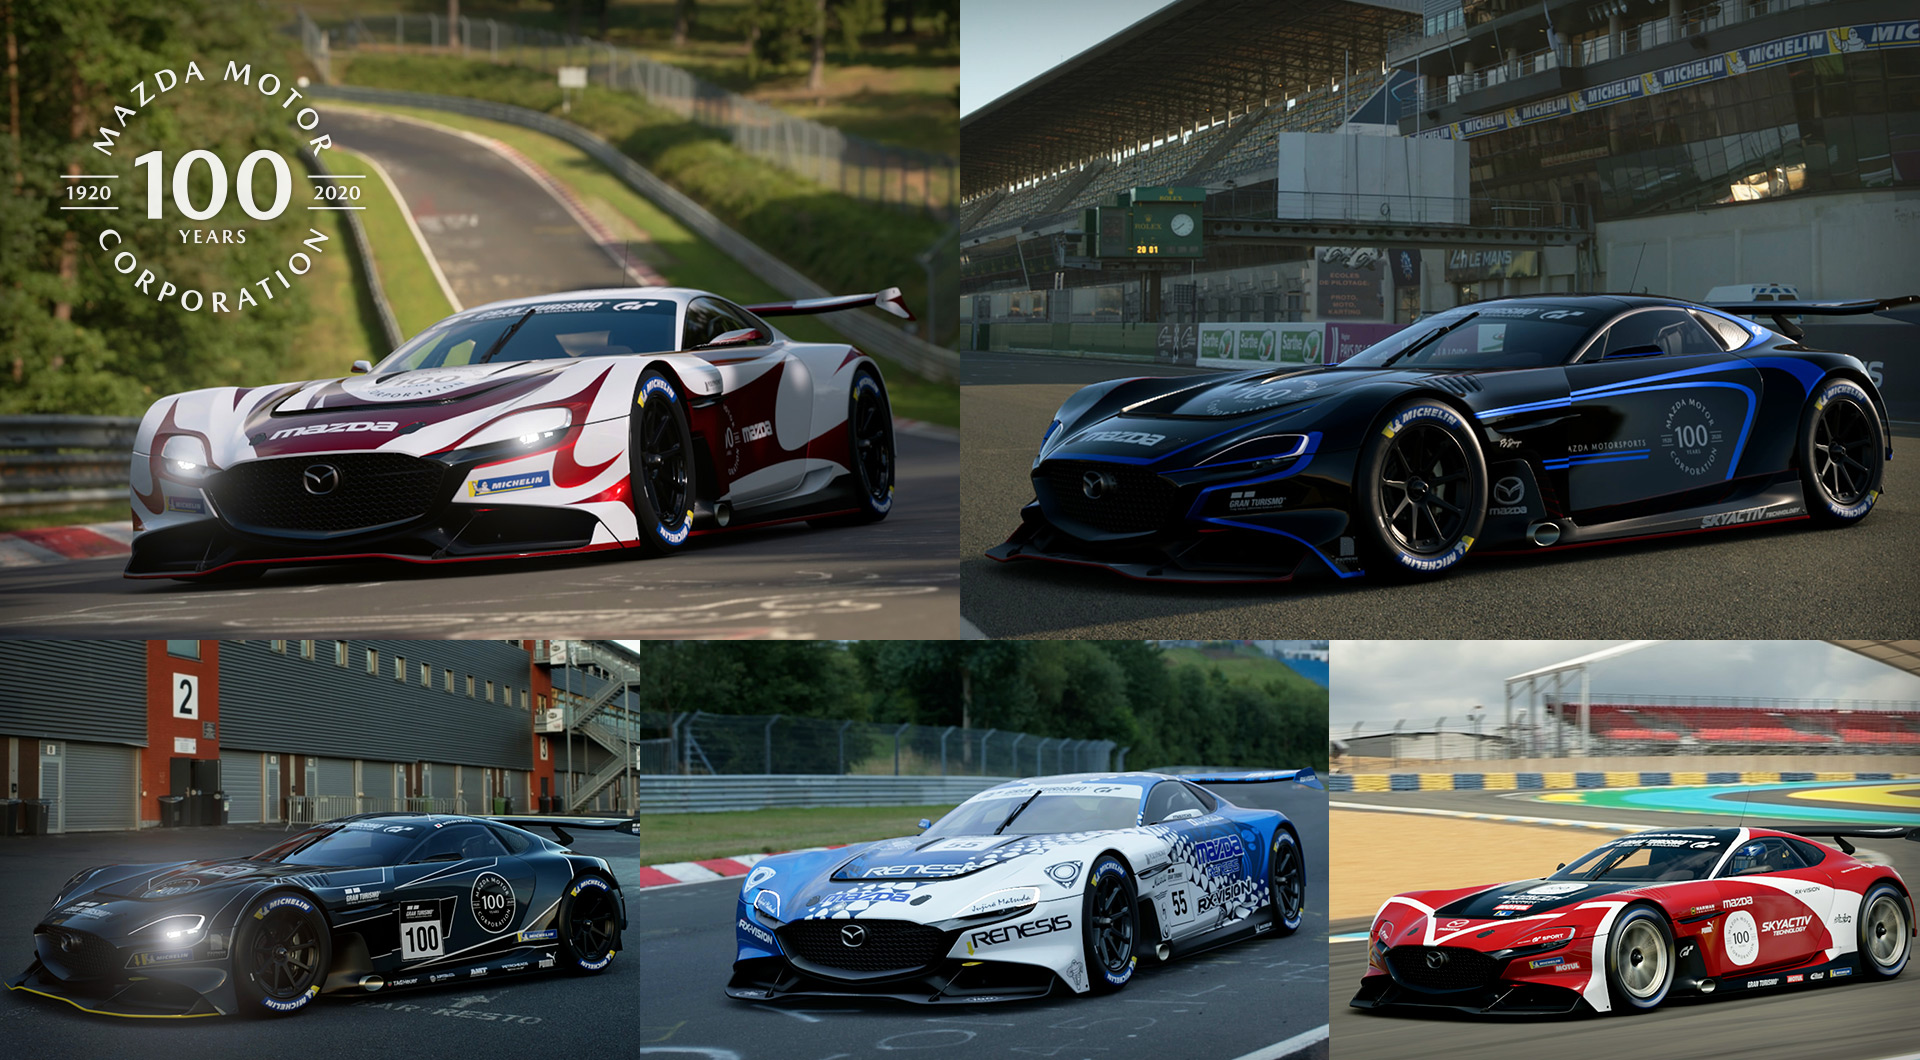 We Present the Winners of the MAZDA 100th Anniversary RX-VISION